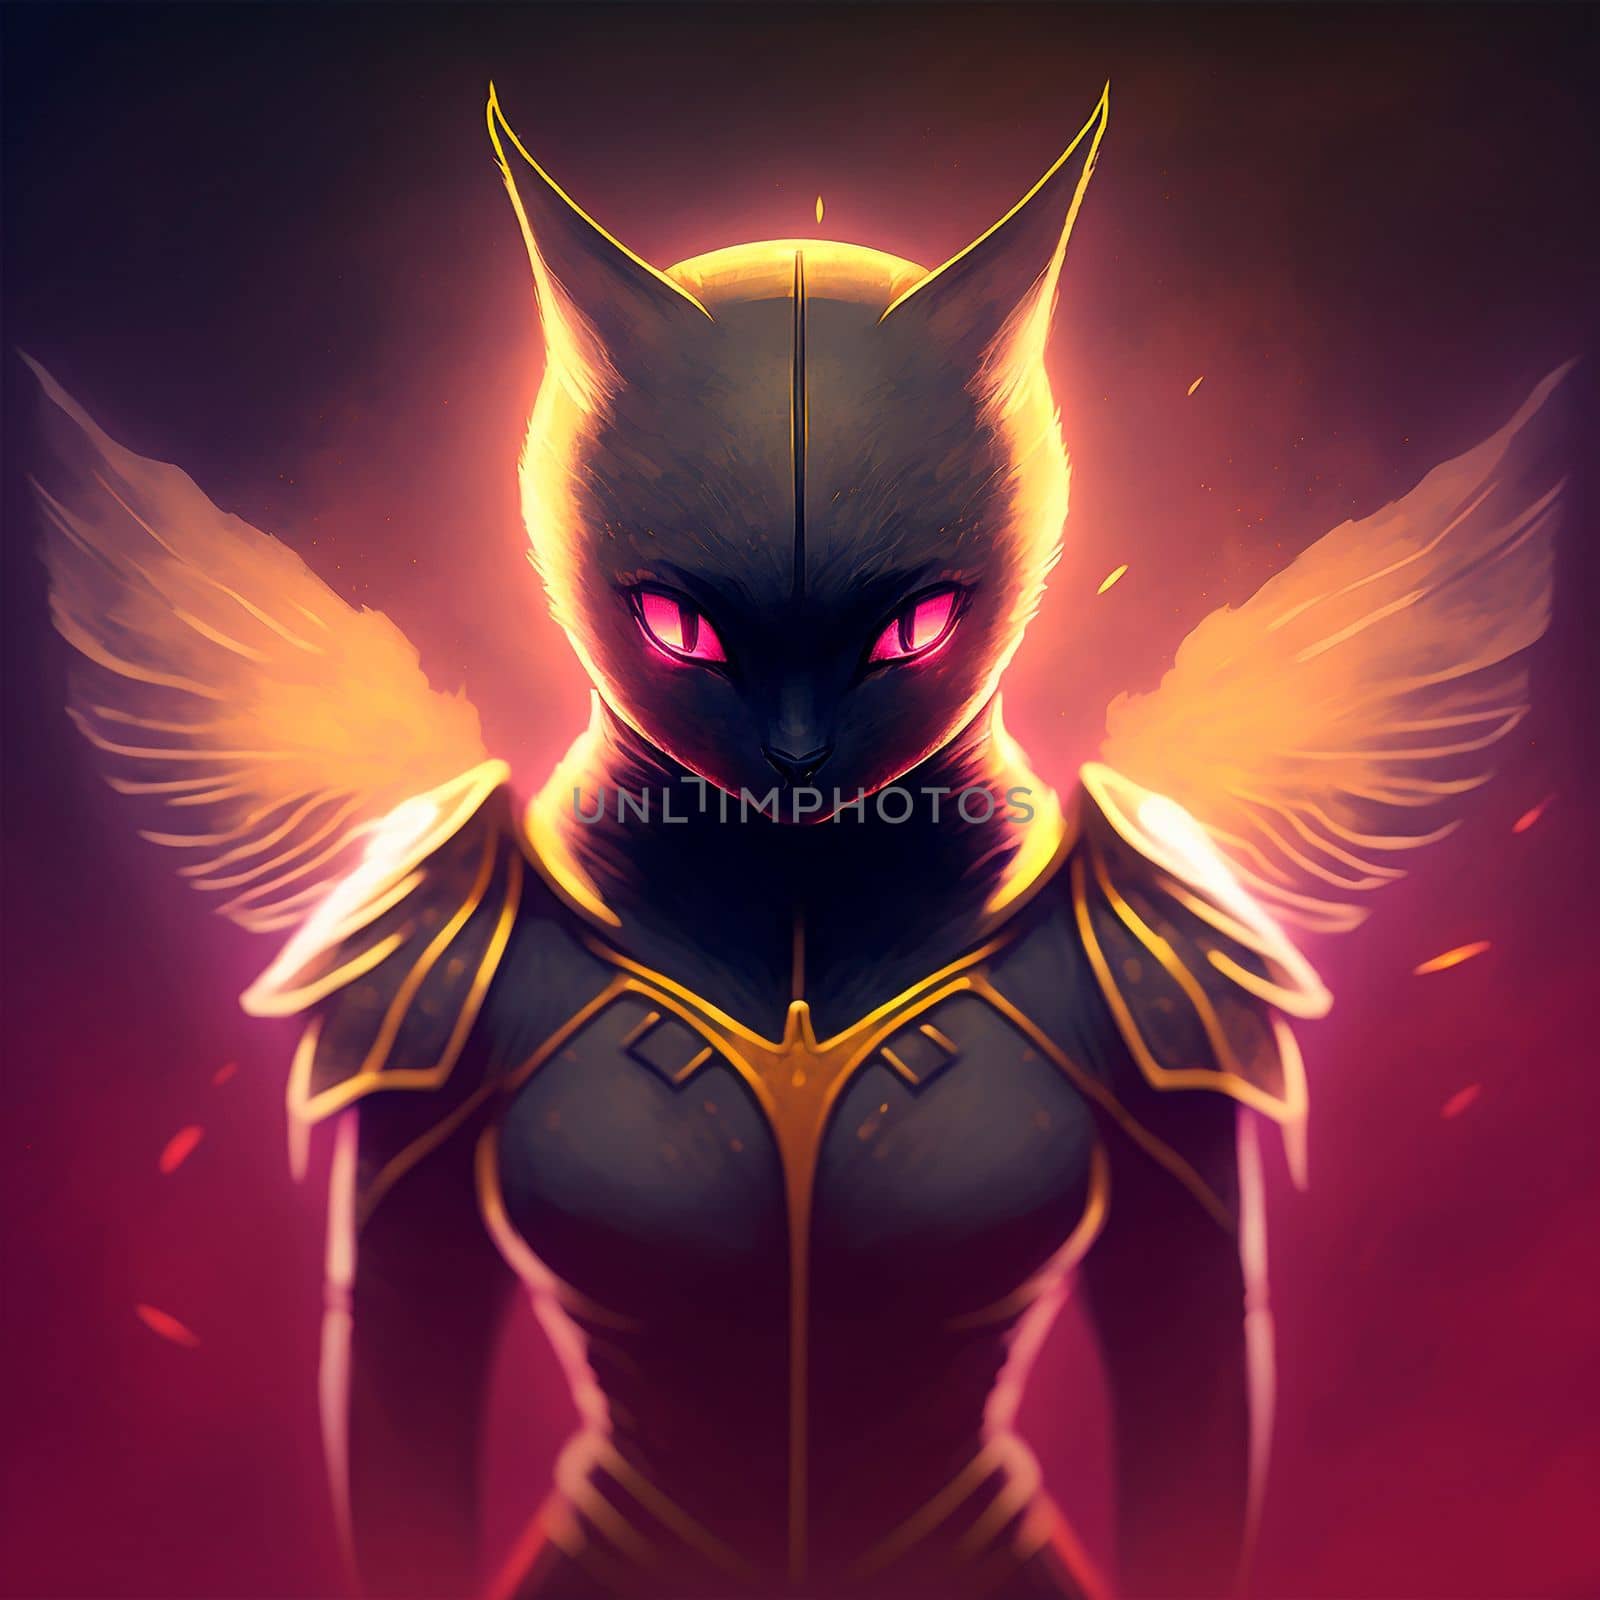 Cat girl with wings by NeuroSky